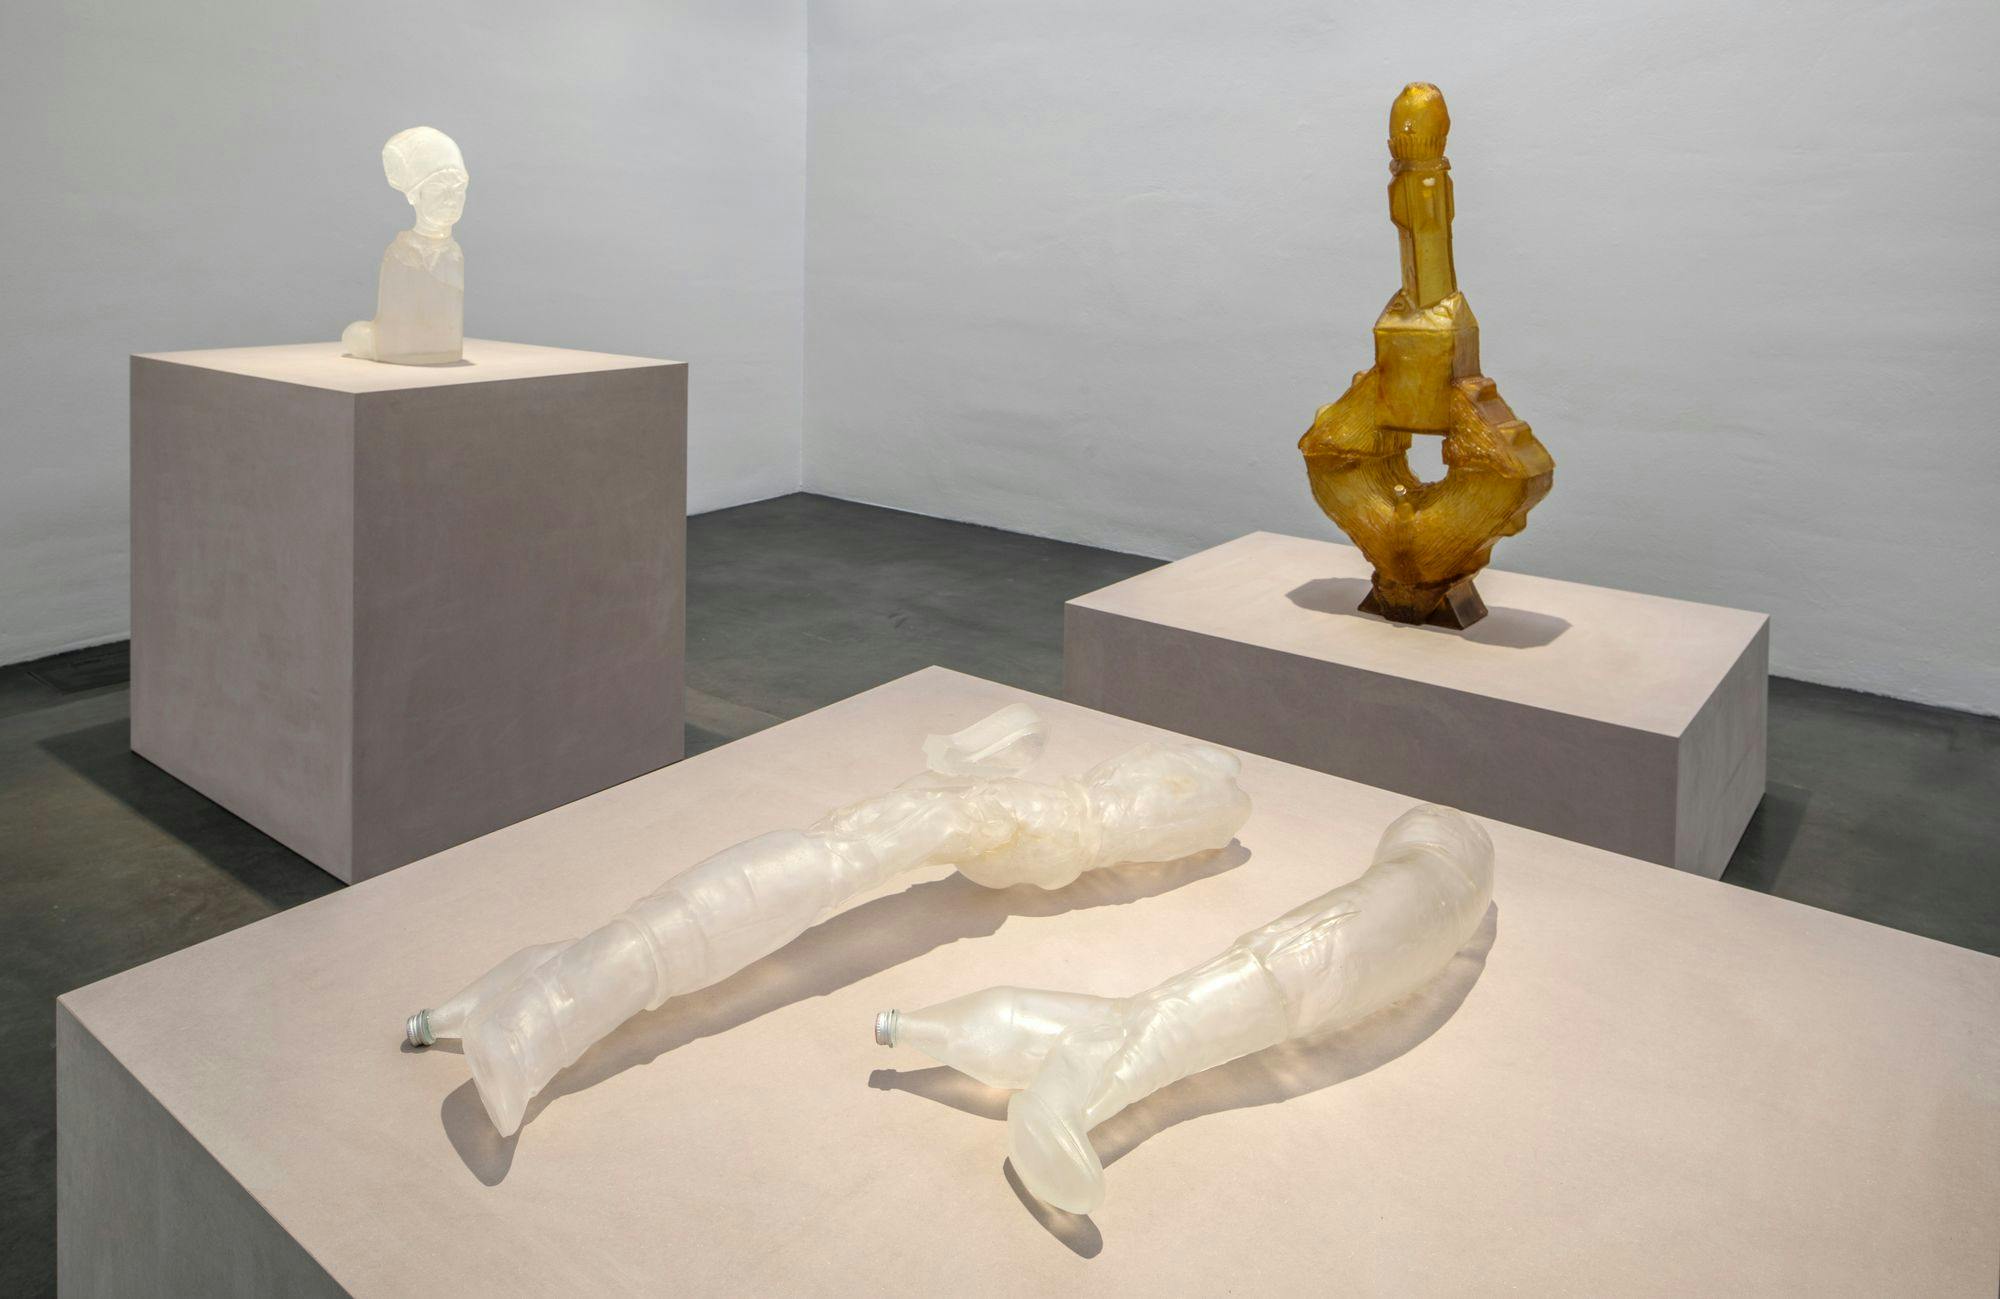 An installation view of sculptures by Andra Ursuța